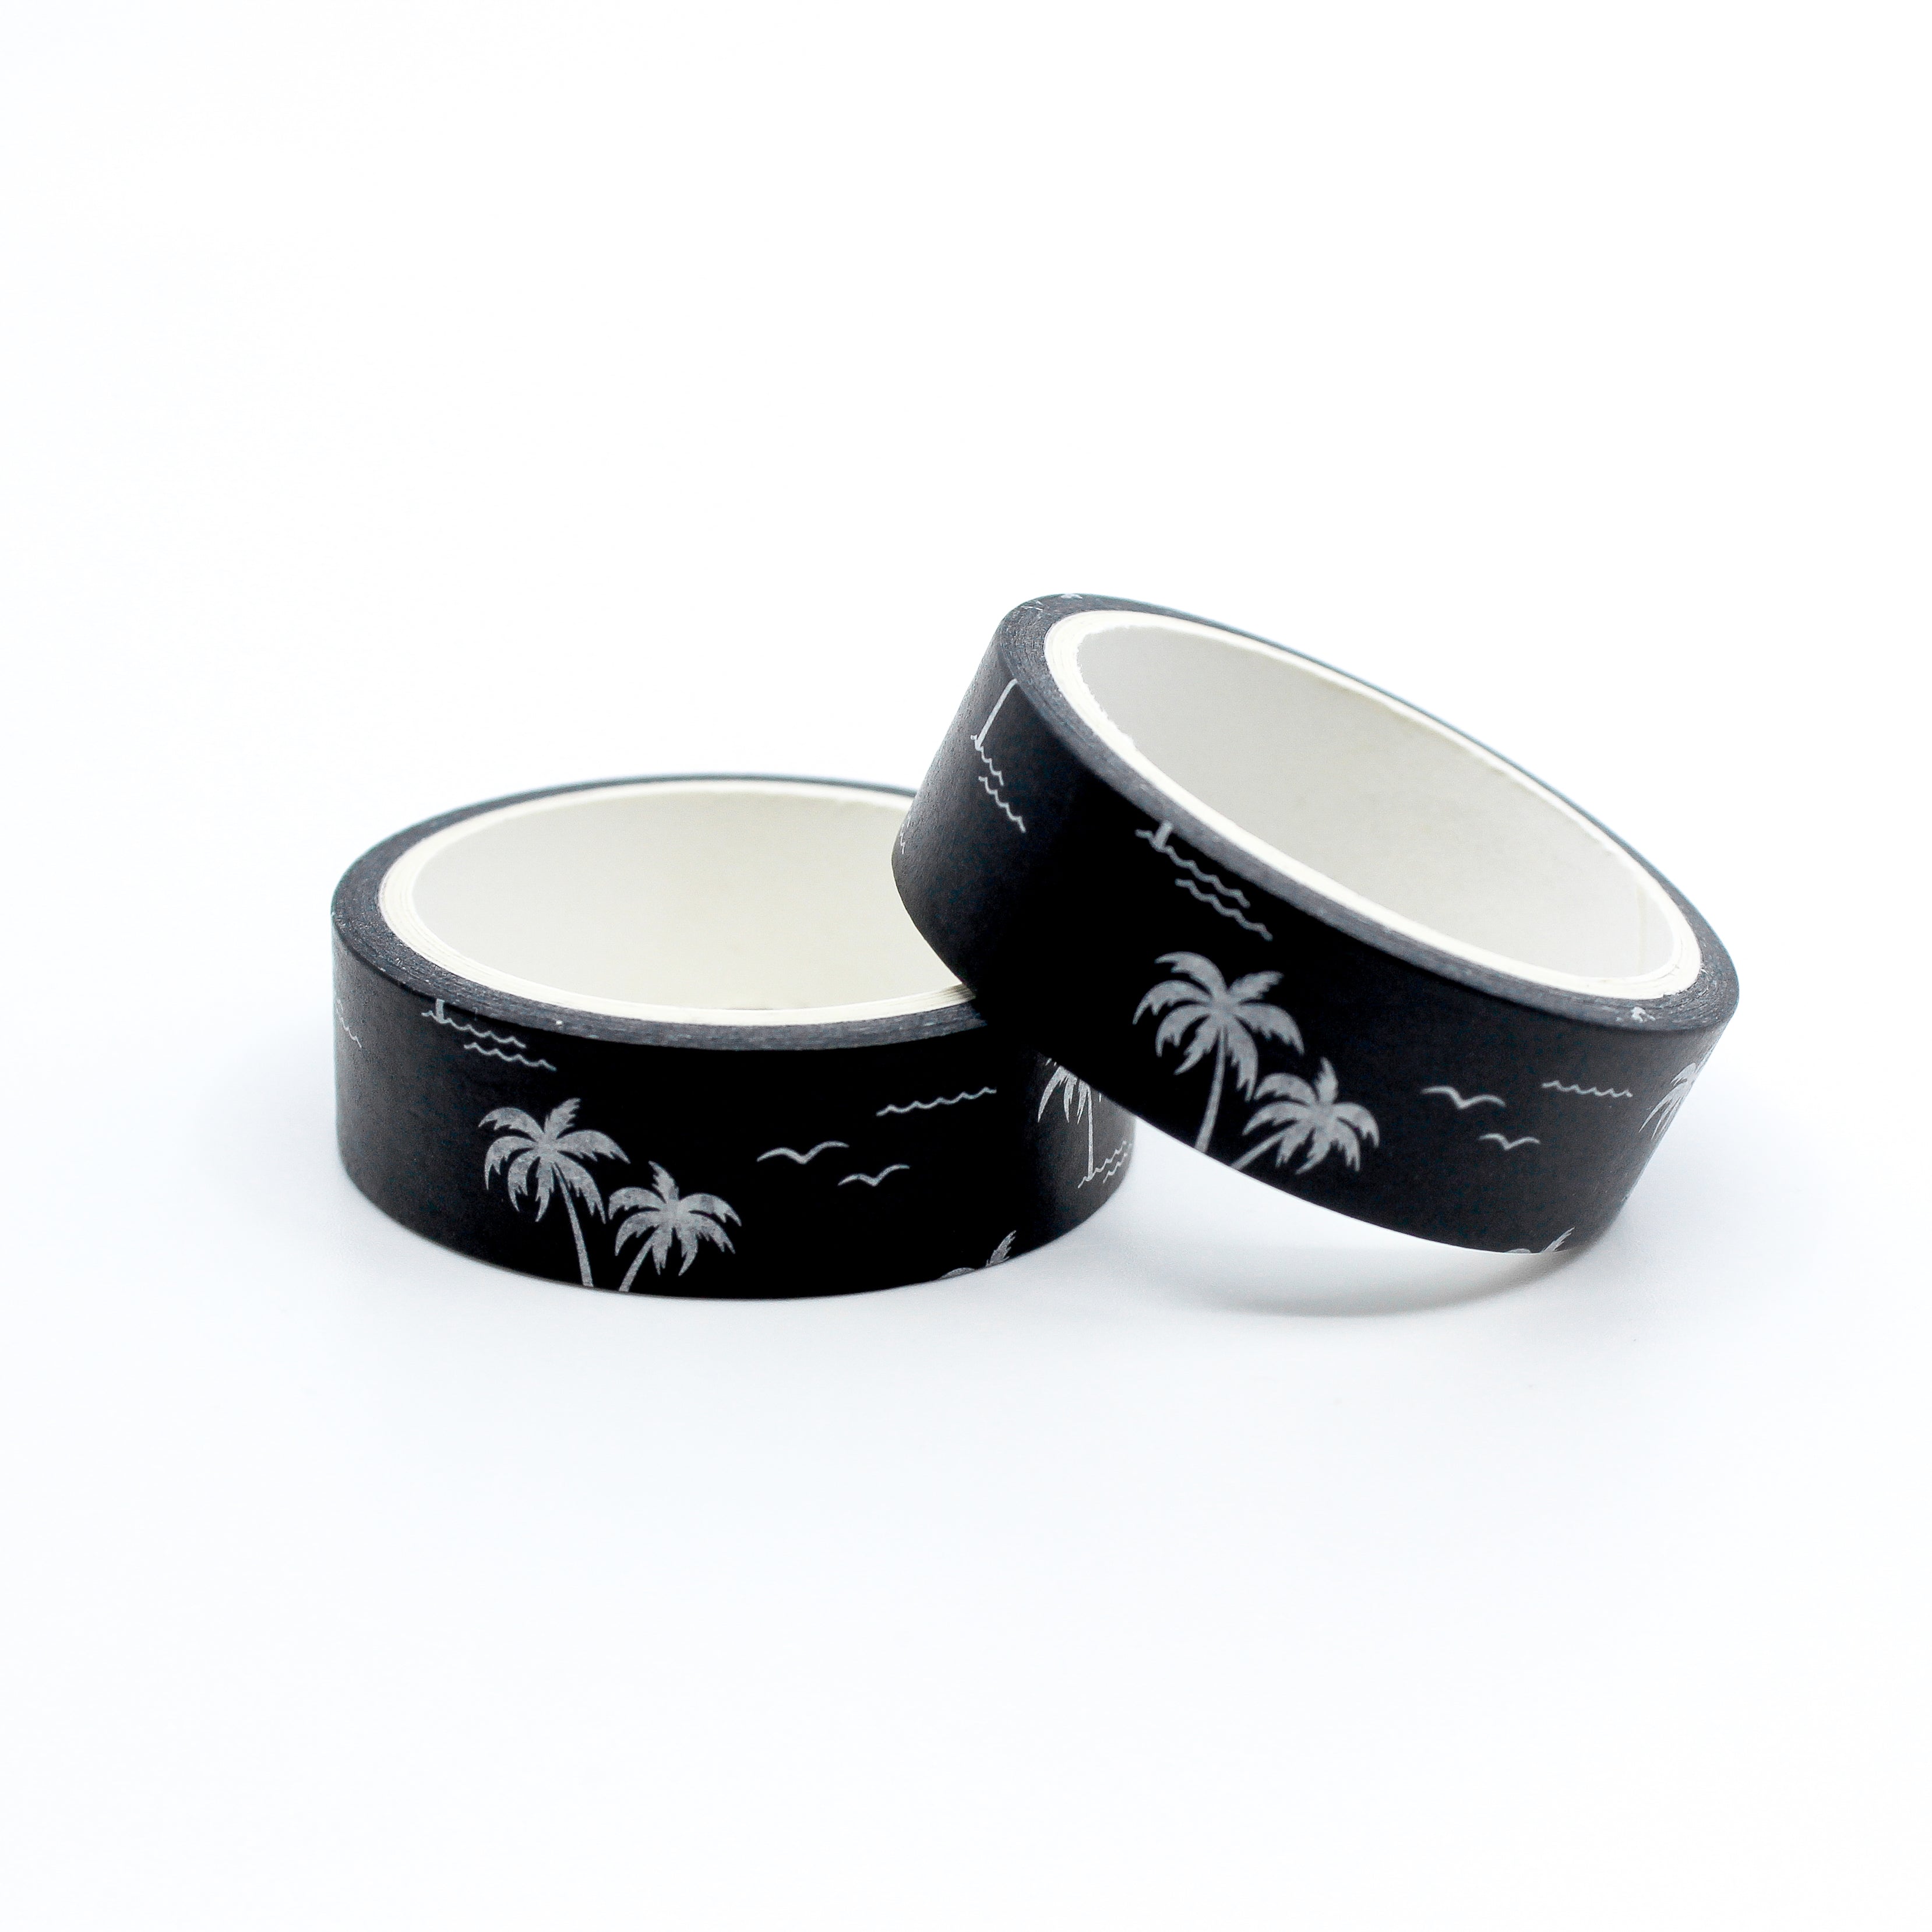 This is a cute white and black palm tree in California ocean beach washi tapes from BBB Supplies Craft Shop